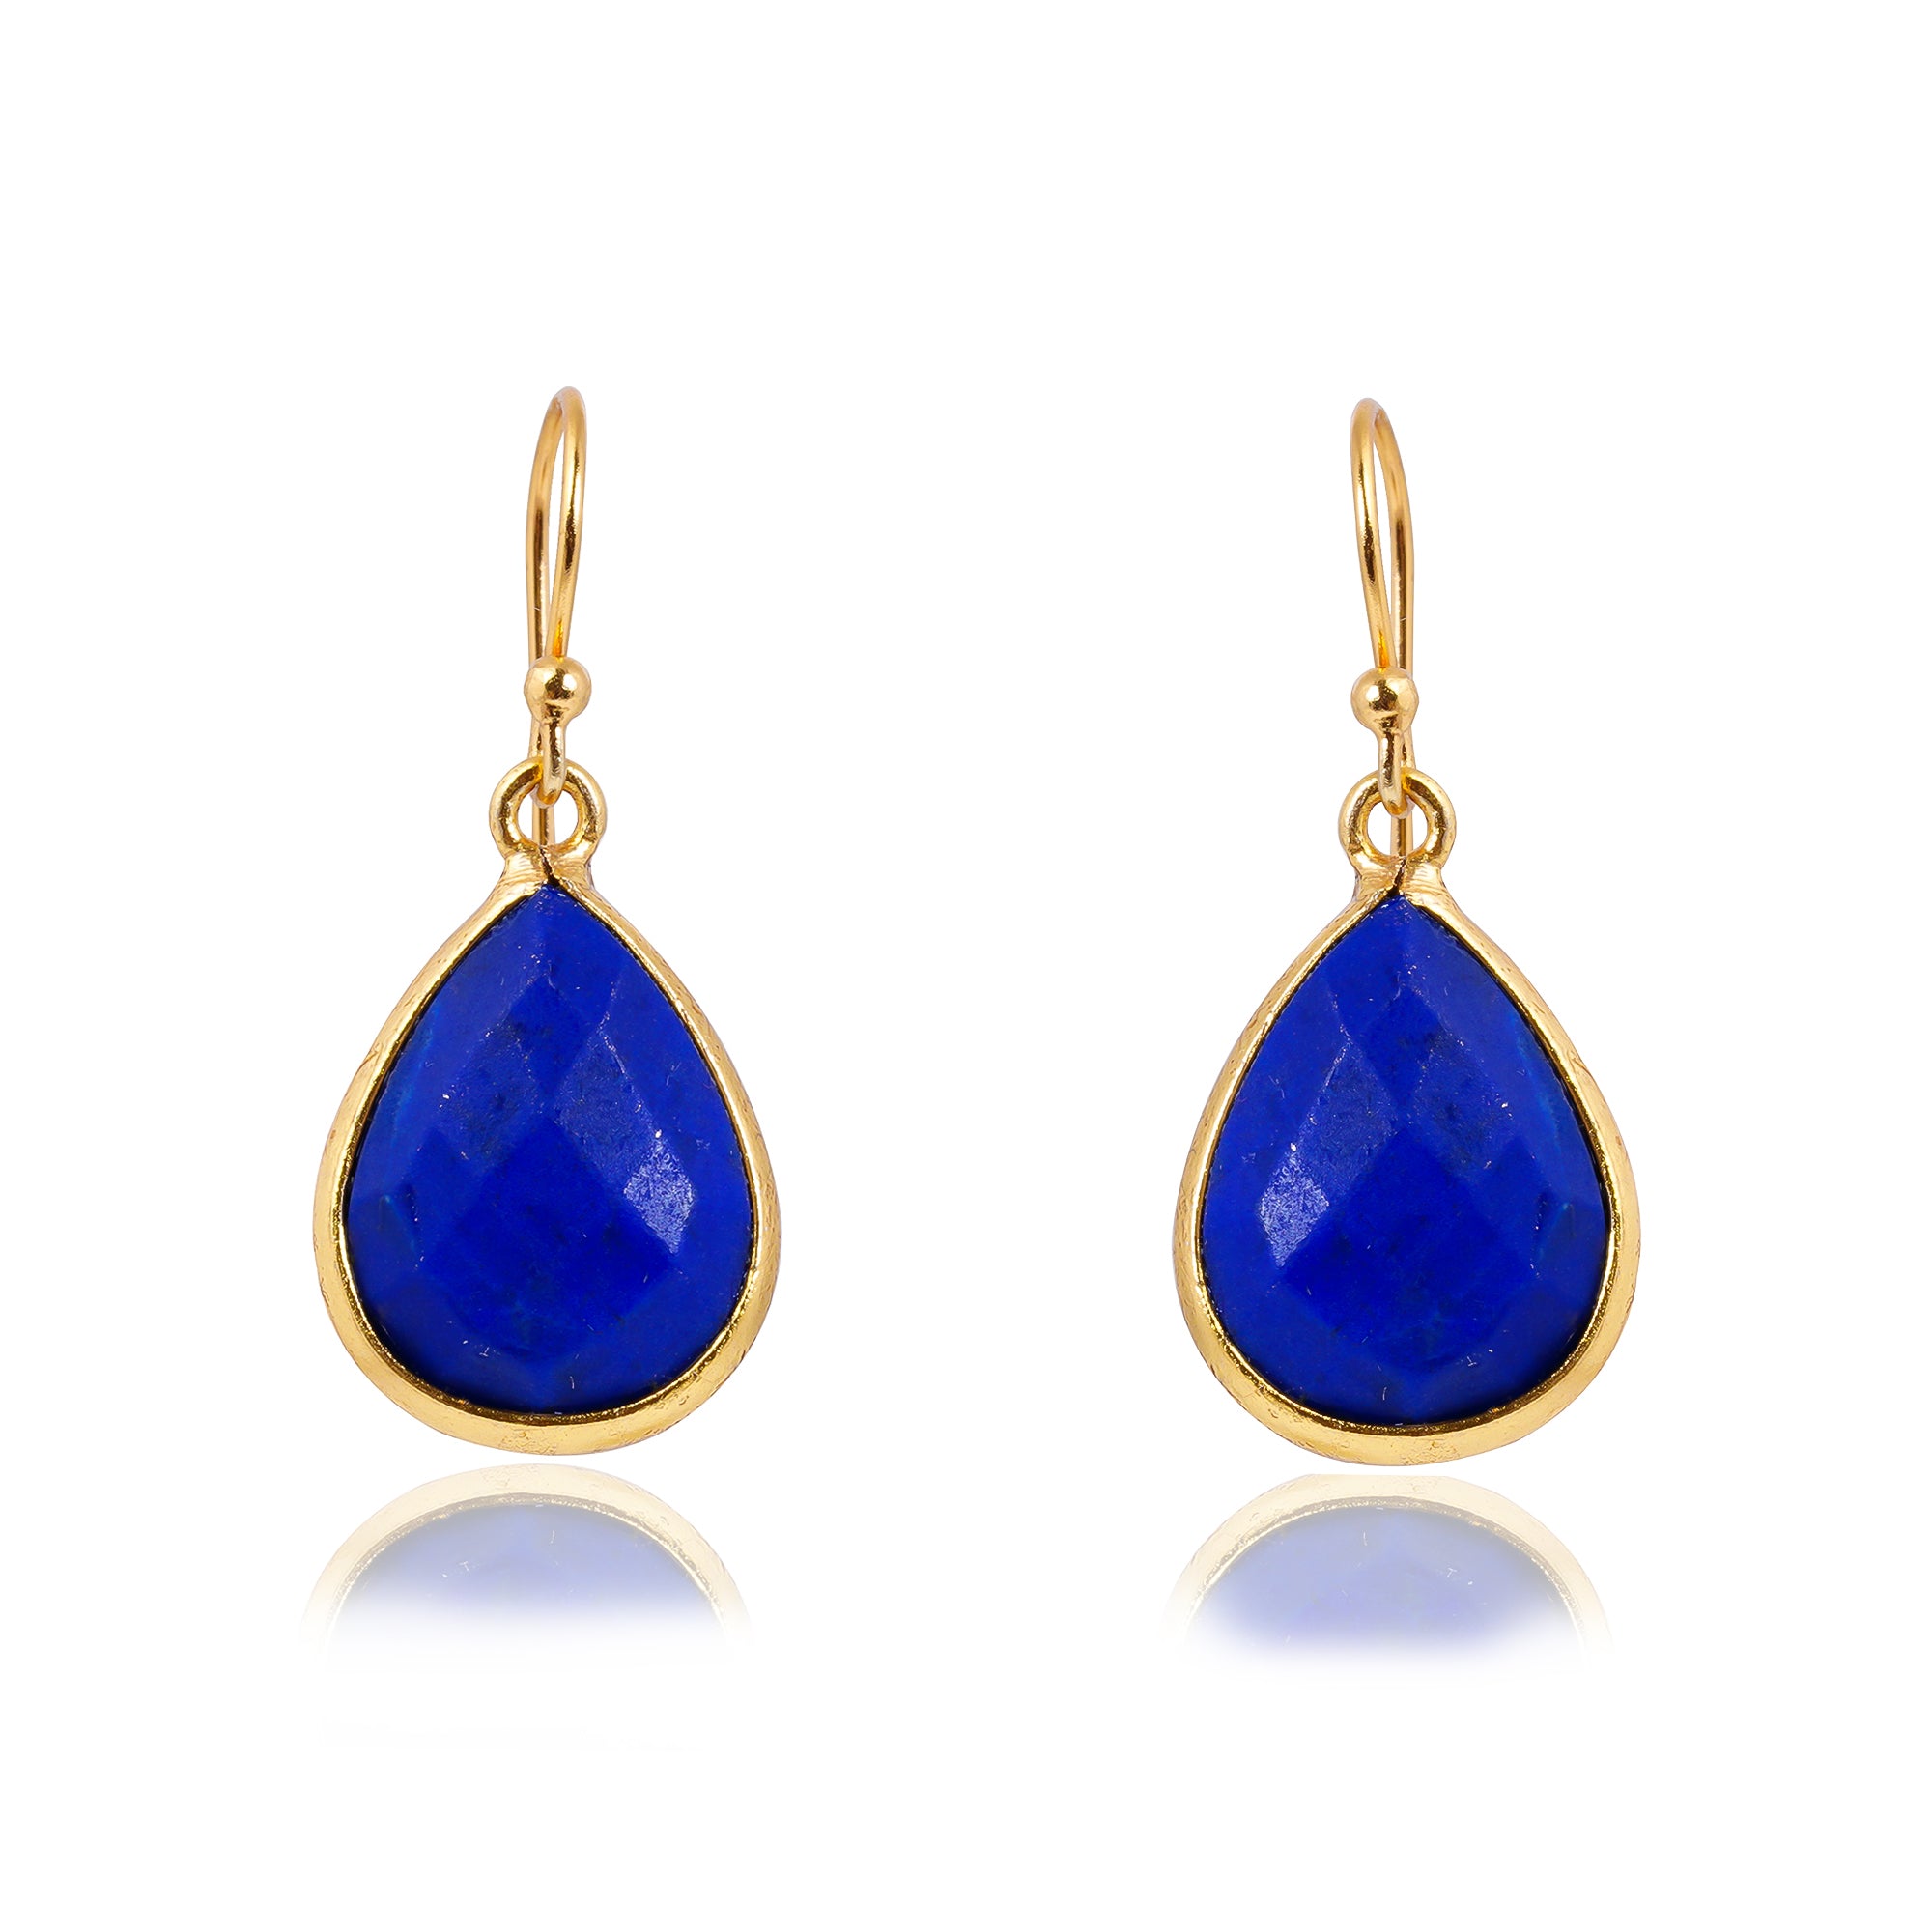 Buy Handcrafted Silver Gold Plated Blue Lapis Earring